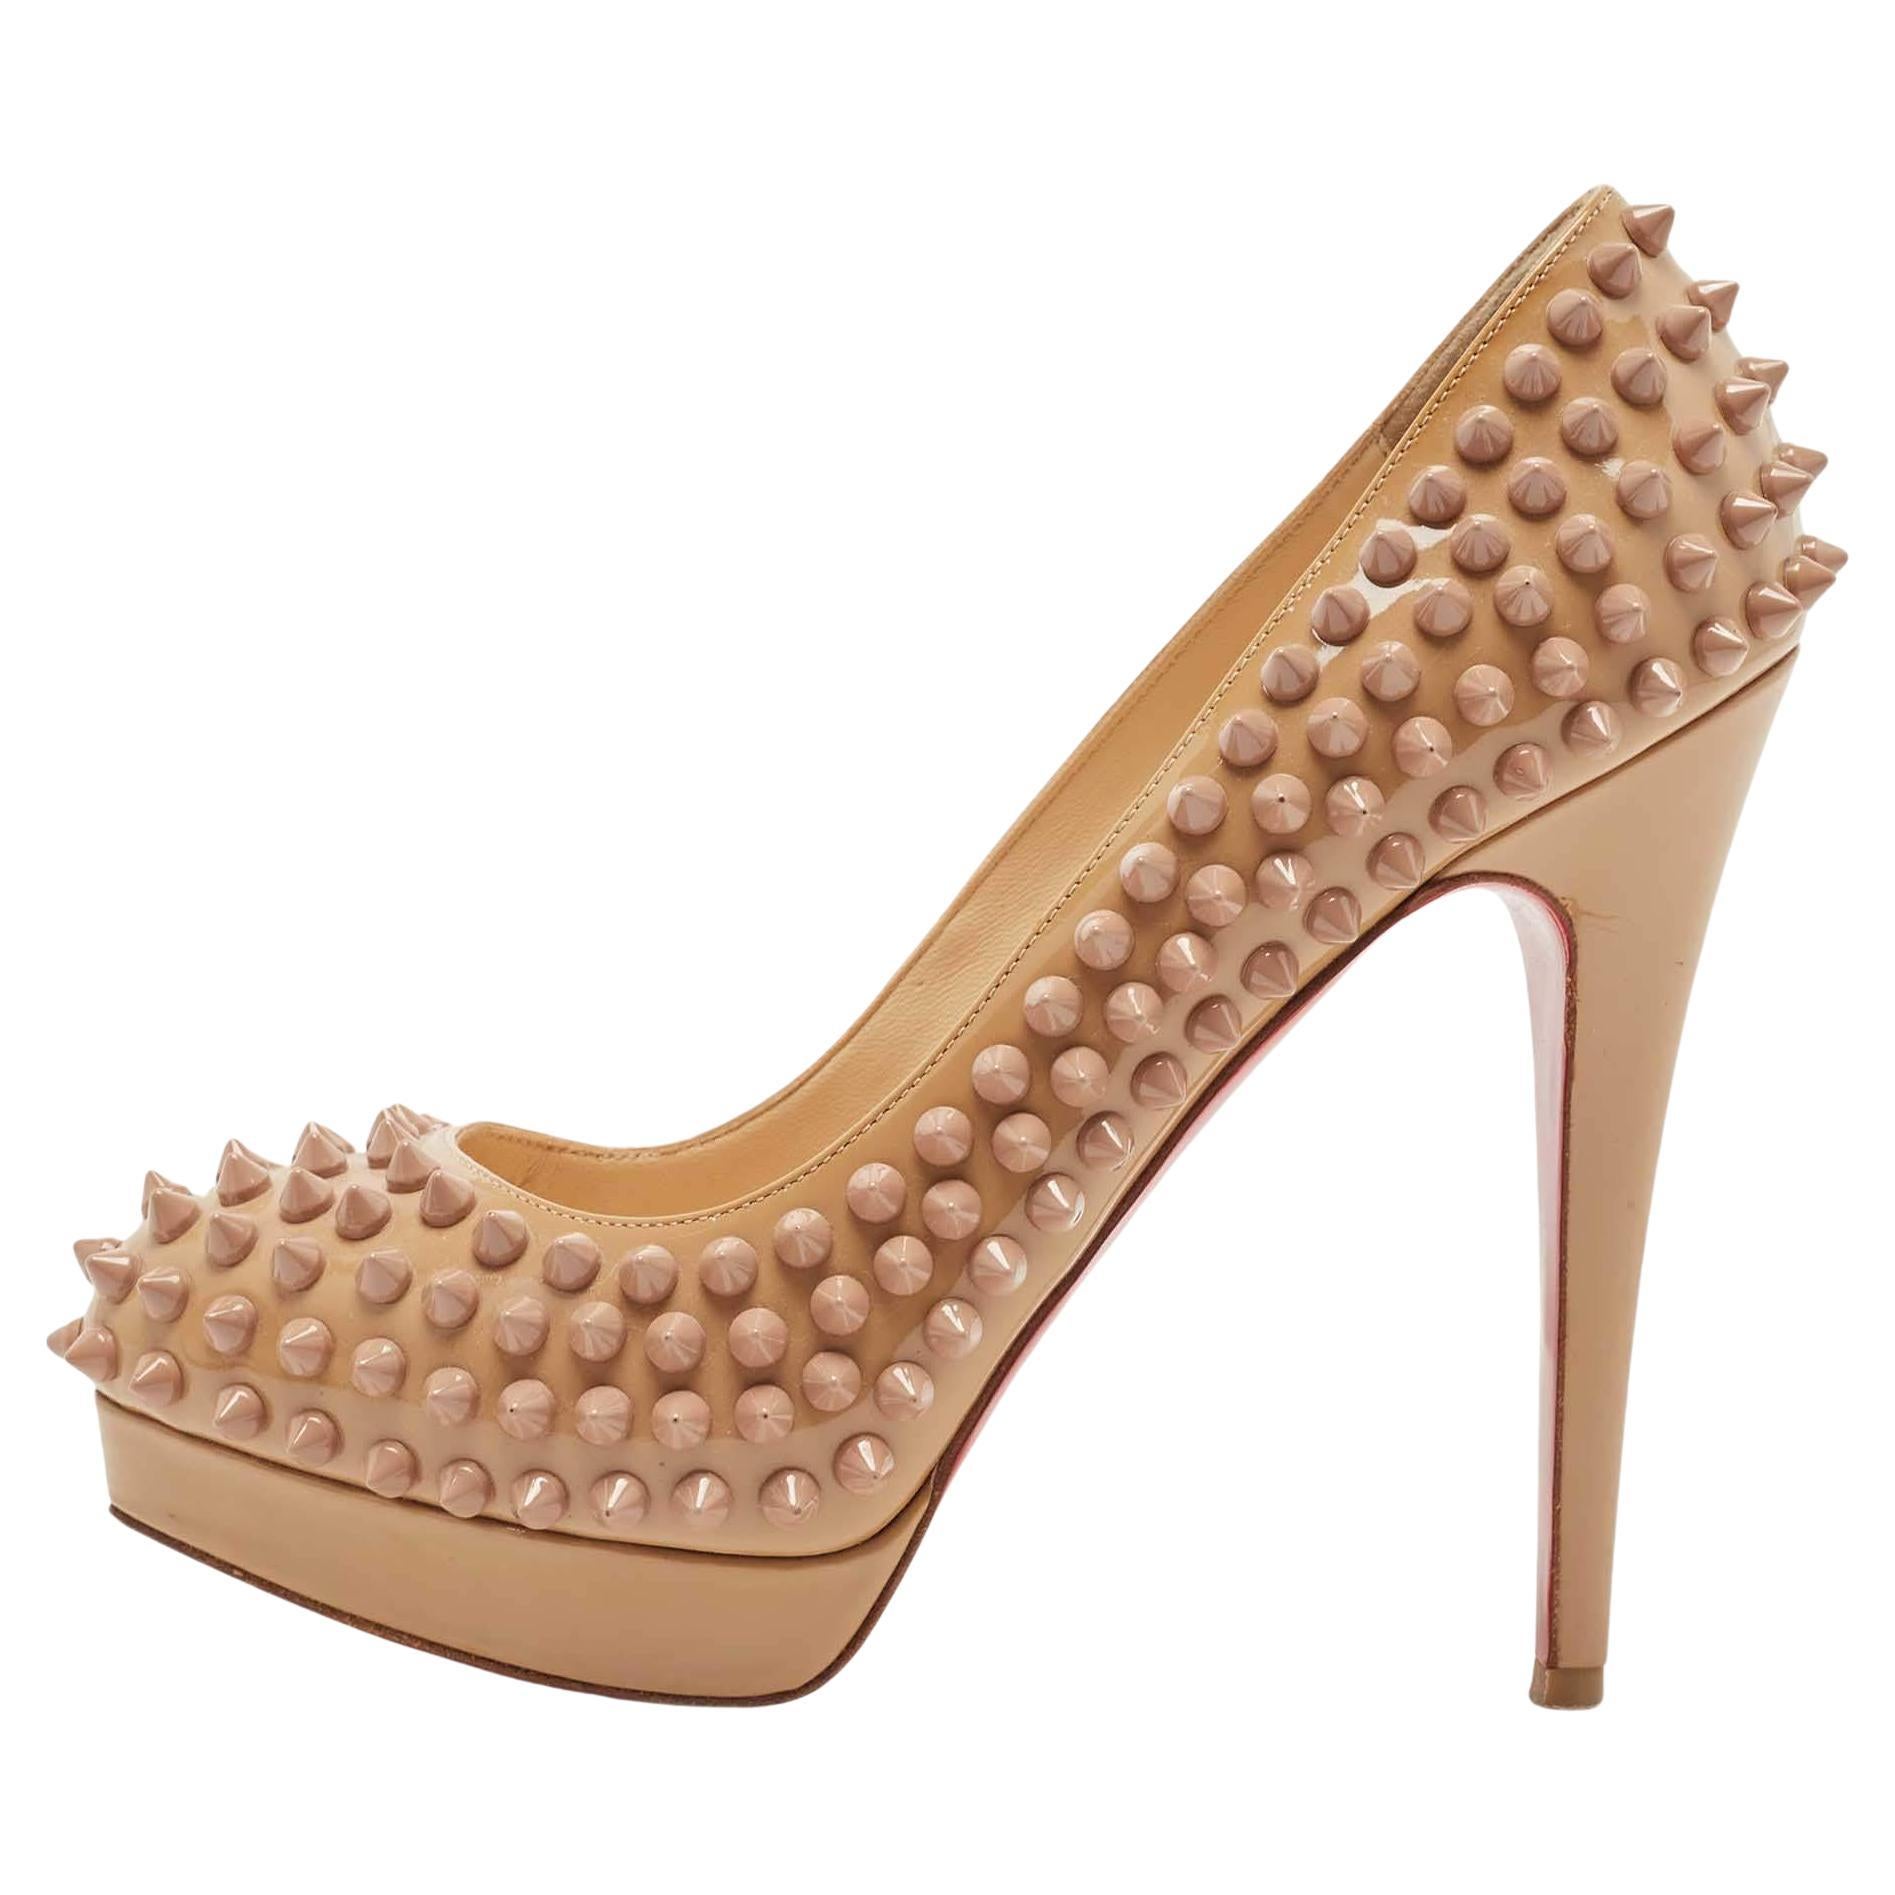 Christian Louboutin Beige Patent Leather Alti Spiked Platform Pumps Size 36 For Sale